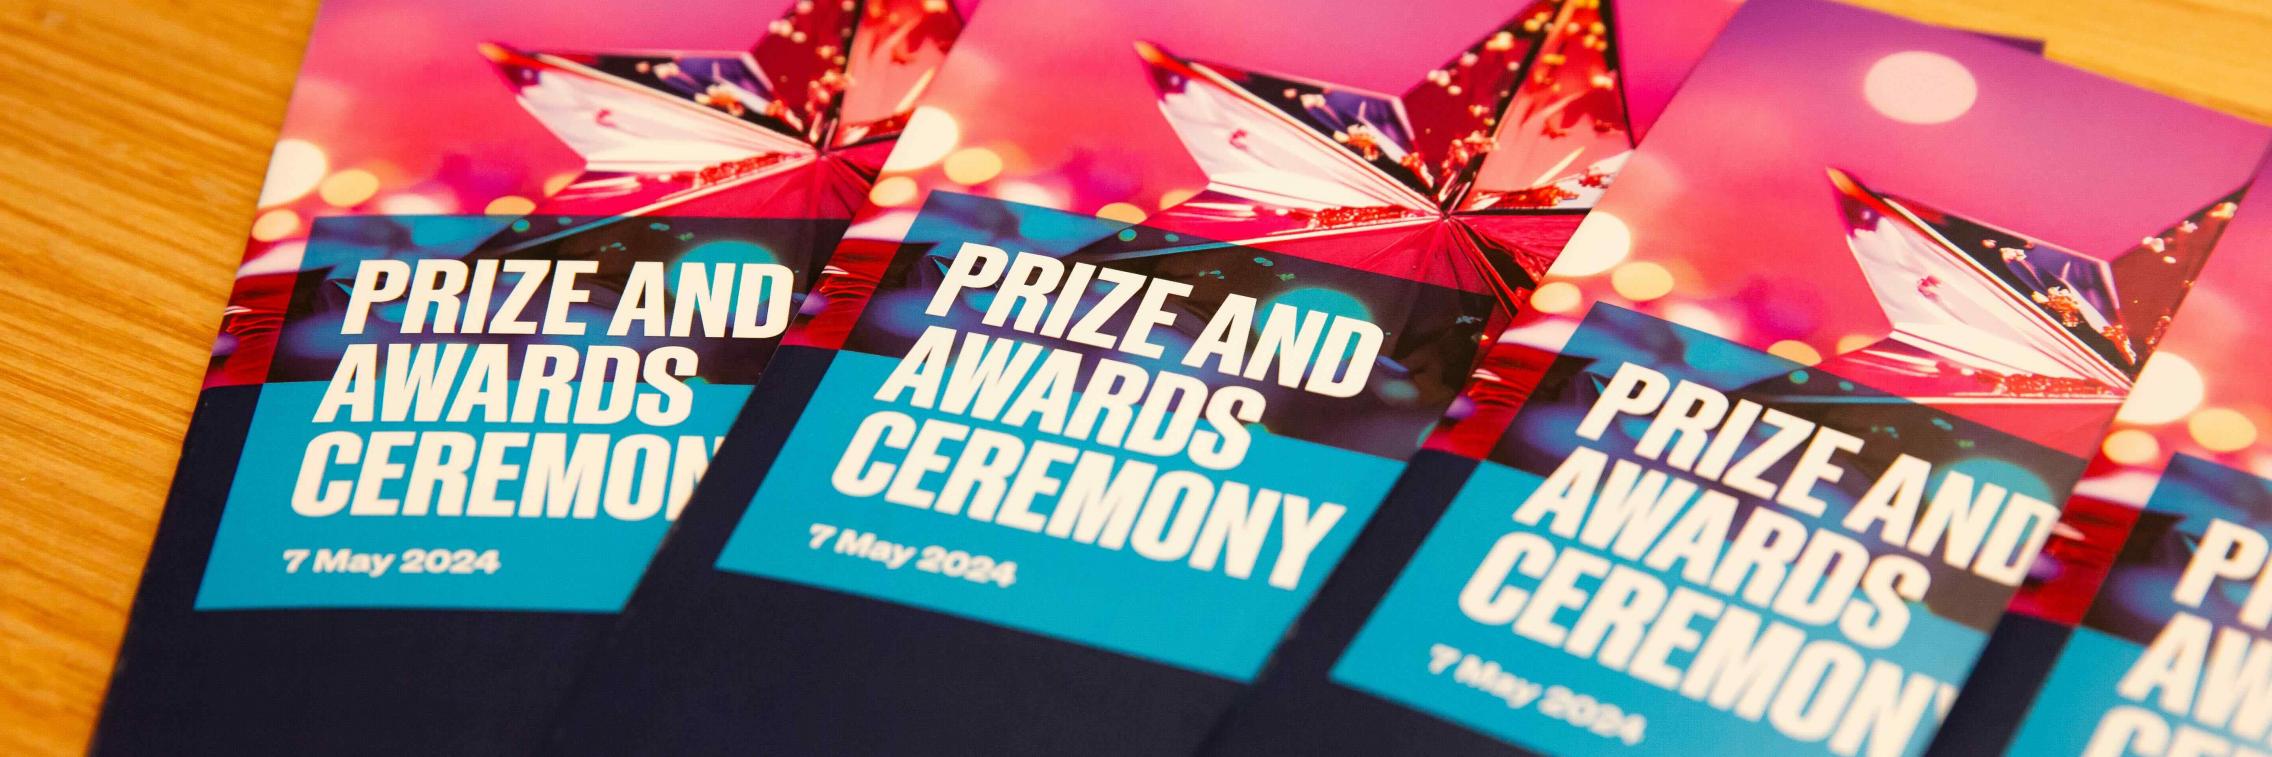 ABS Prizes and awards ceremony brochure 